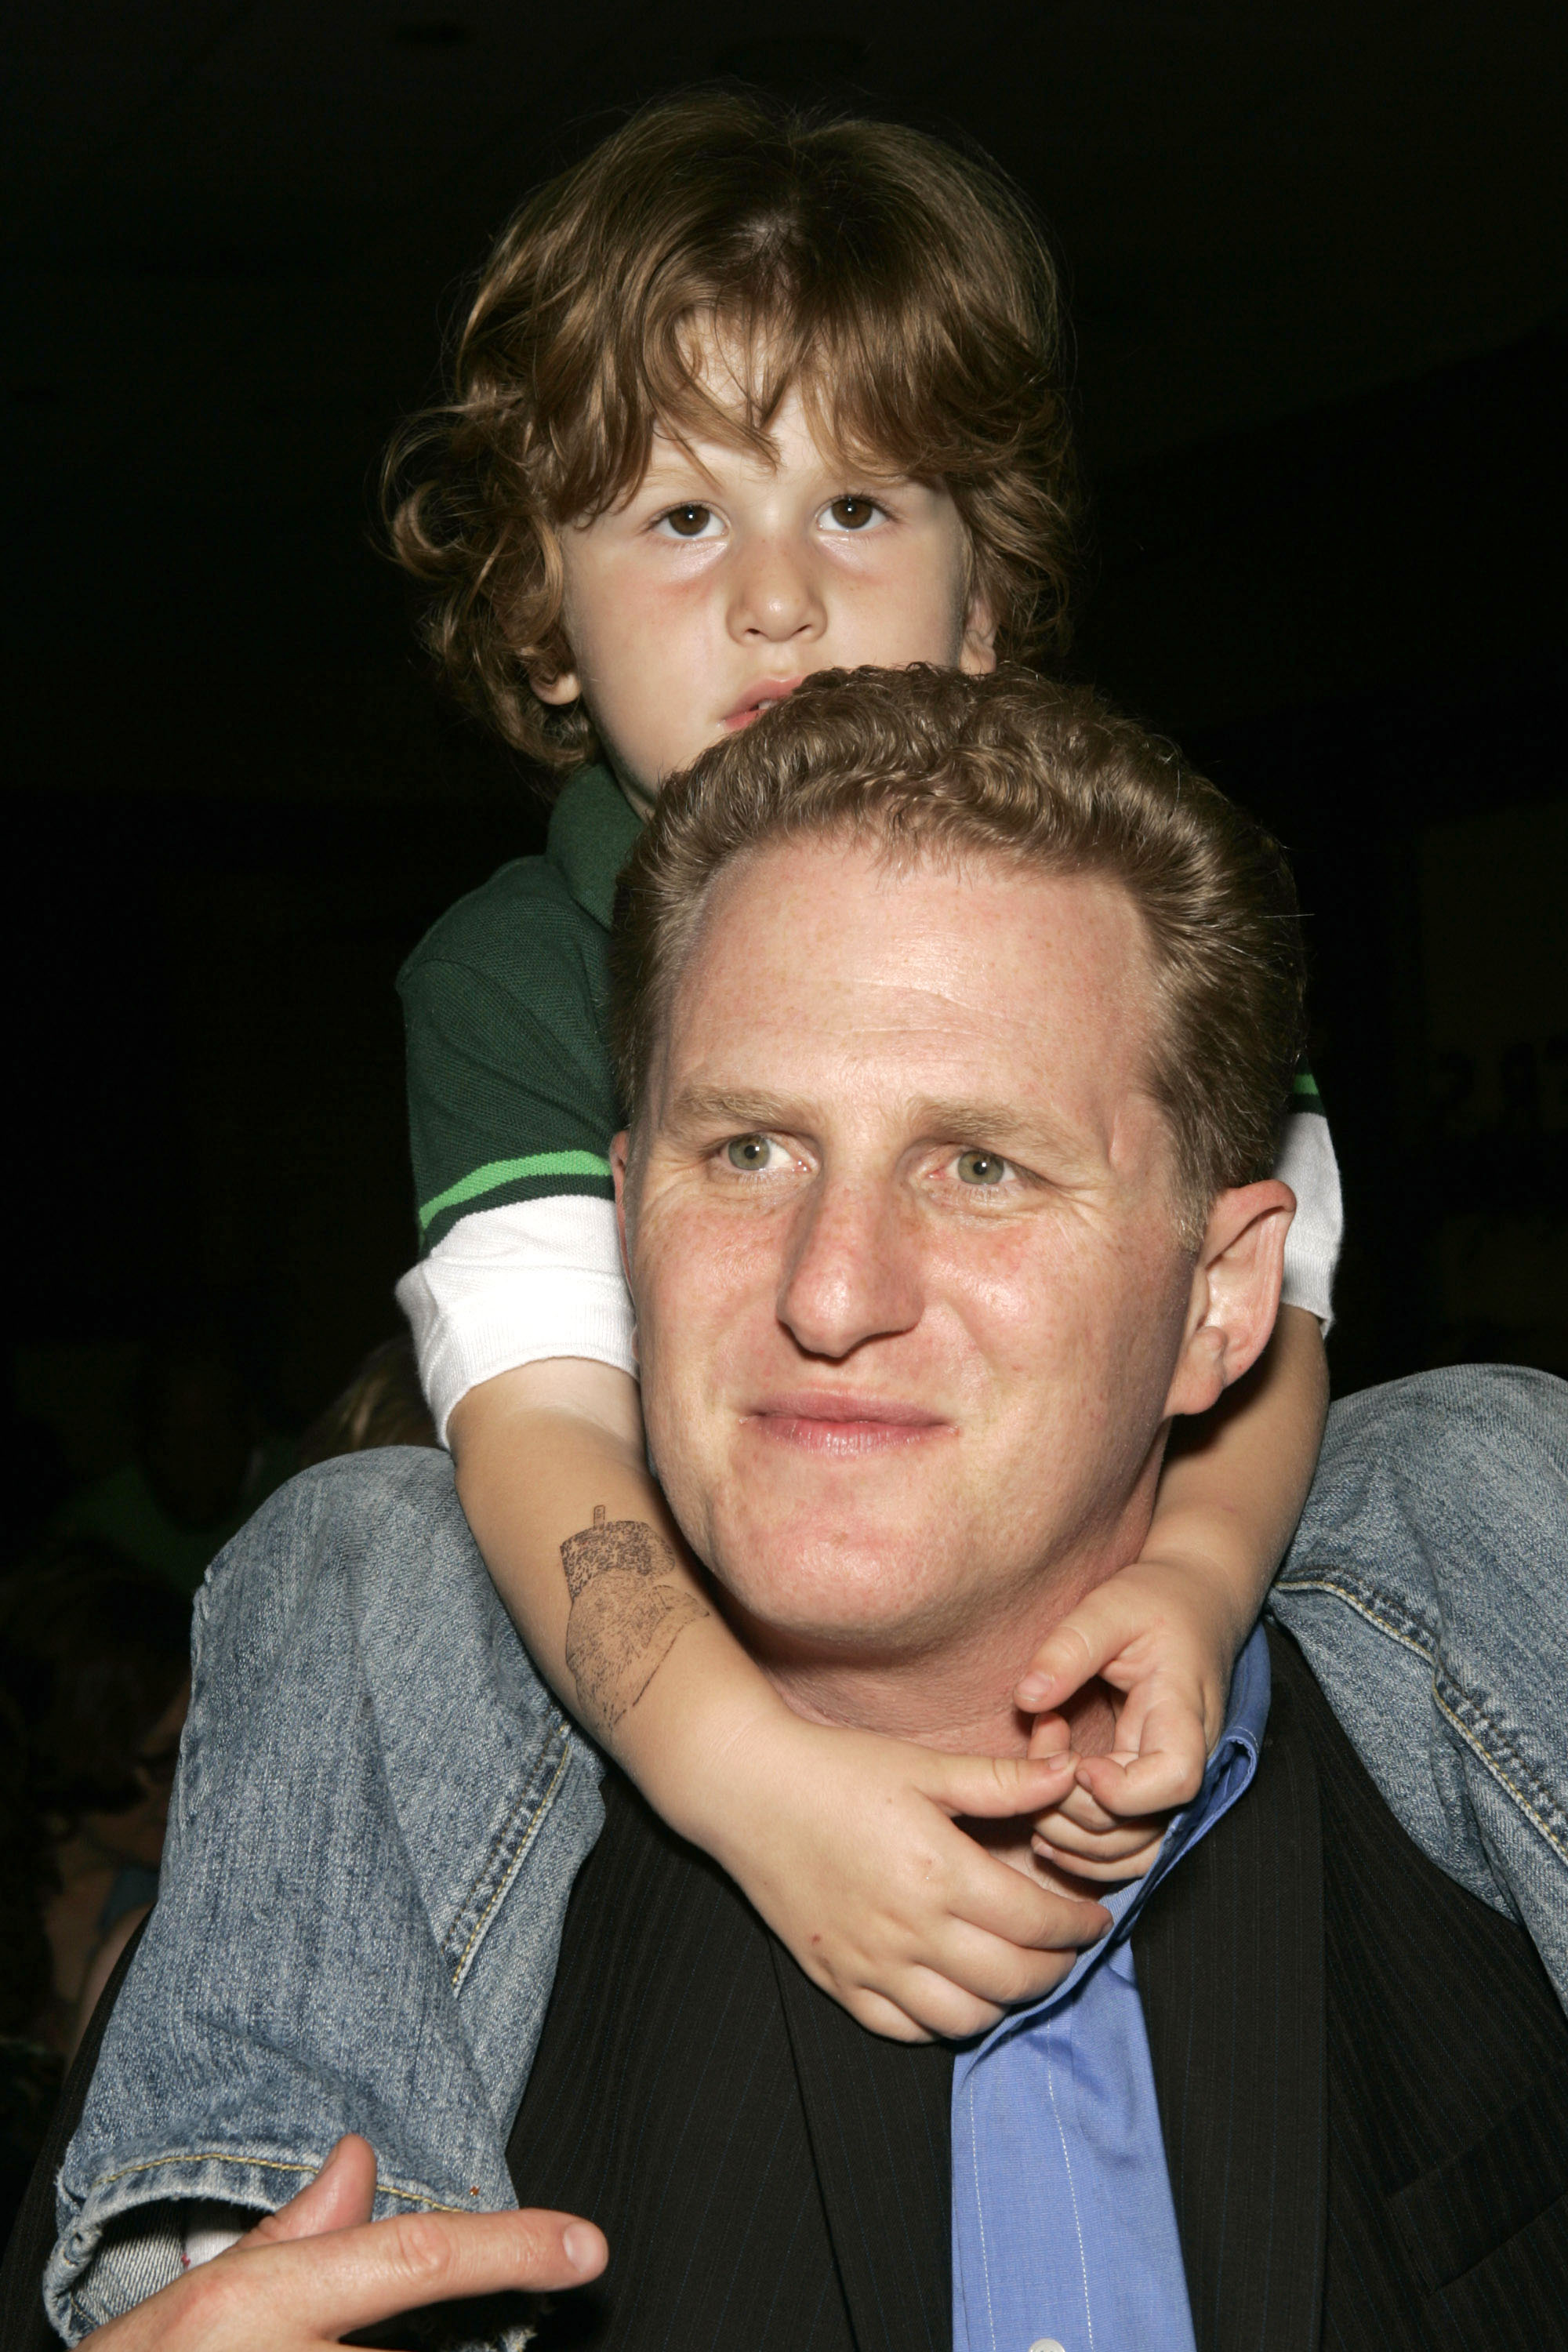 Michael Rapaport and his son Julian Ali during the 4th Annual Indie Producers Awards Gala After Party on May 12, 2006, in Los Angeles, California. | Source: Getty Images